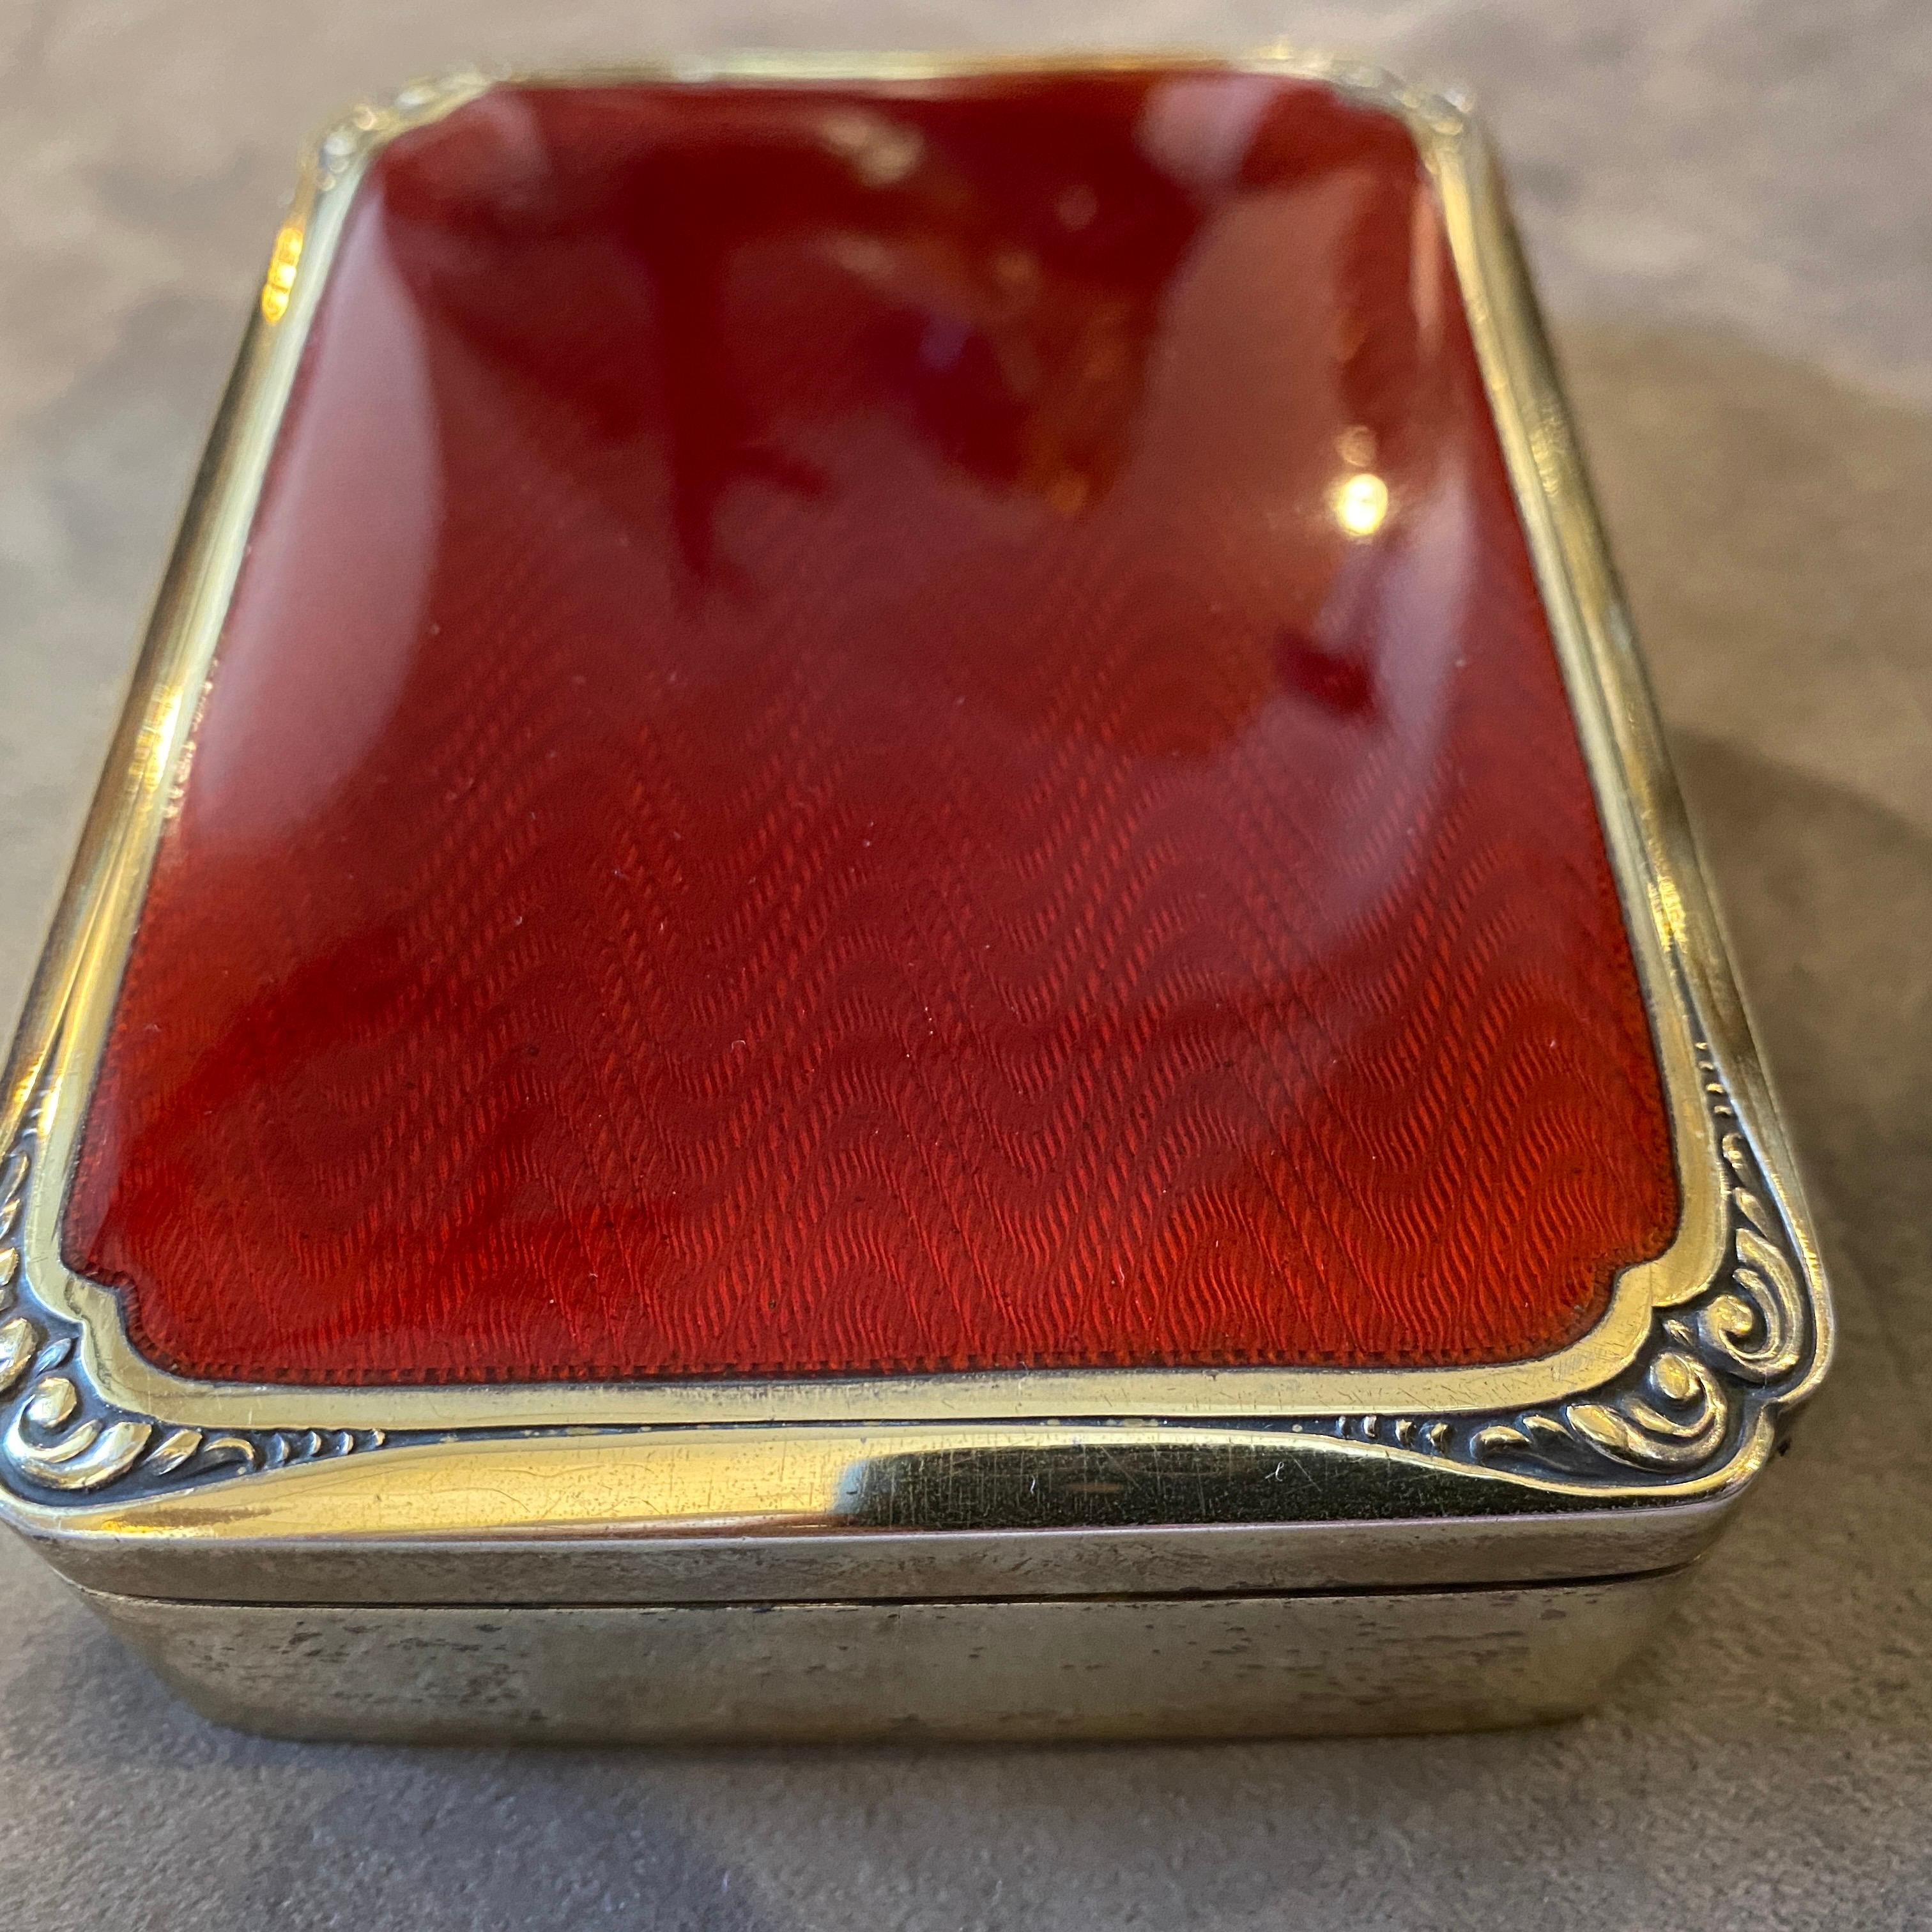 Neoclassical 1970s Red Enameled Vermeil Solid Silver Italian Box by Salimbeni